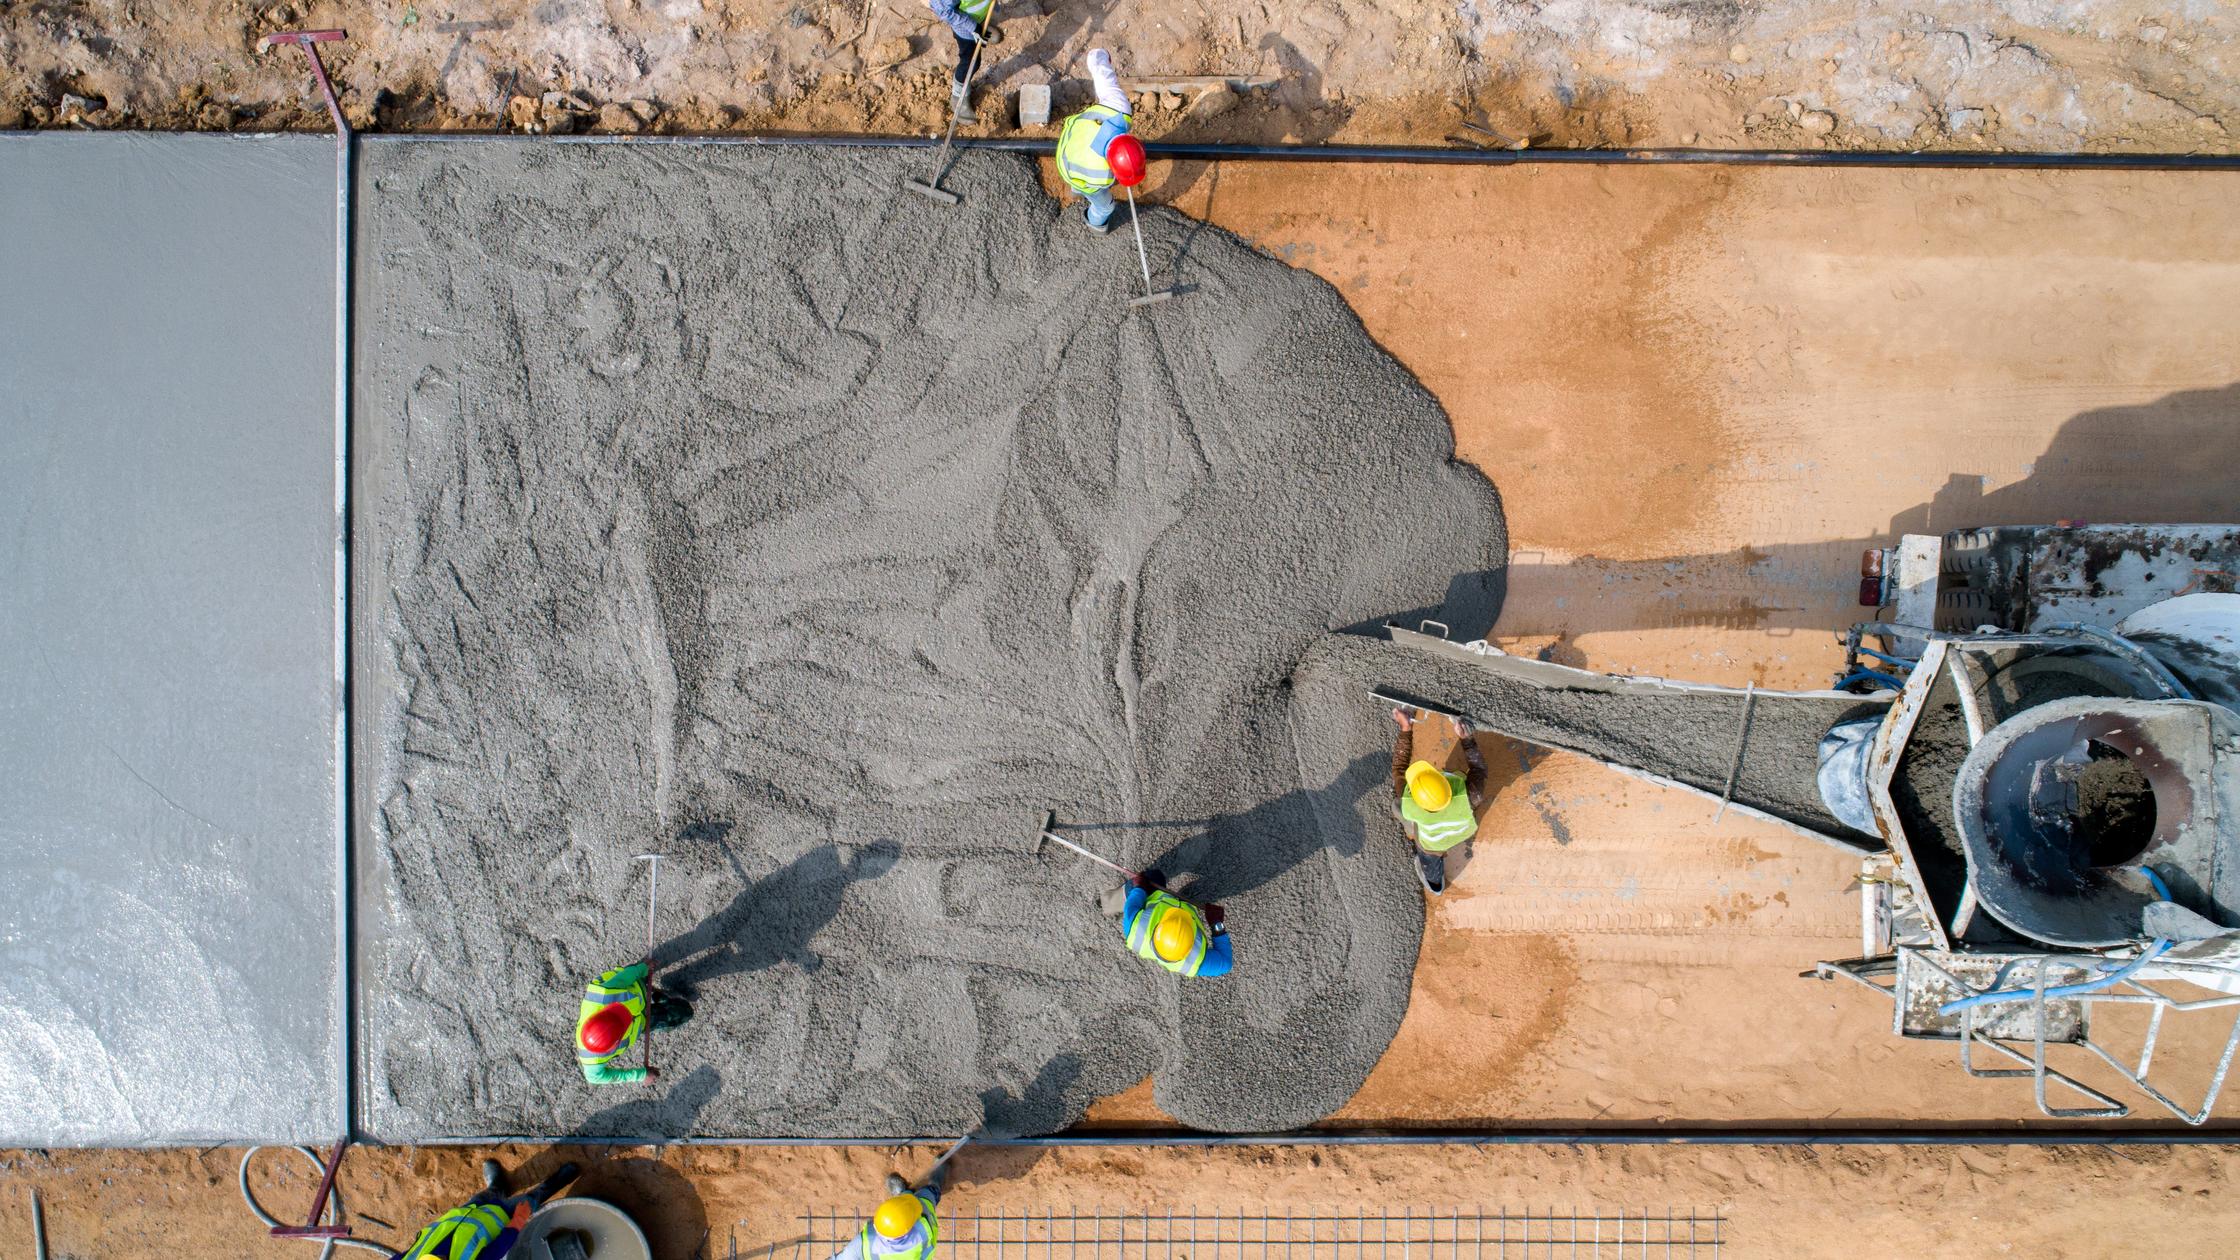 Construction workers pouring a wet concret at road construction site